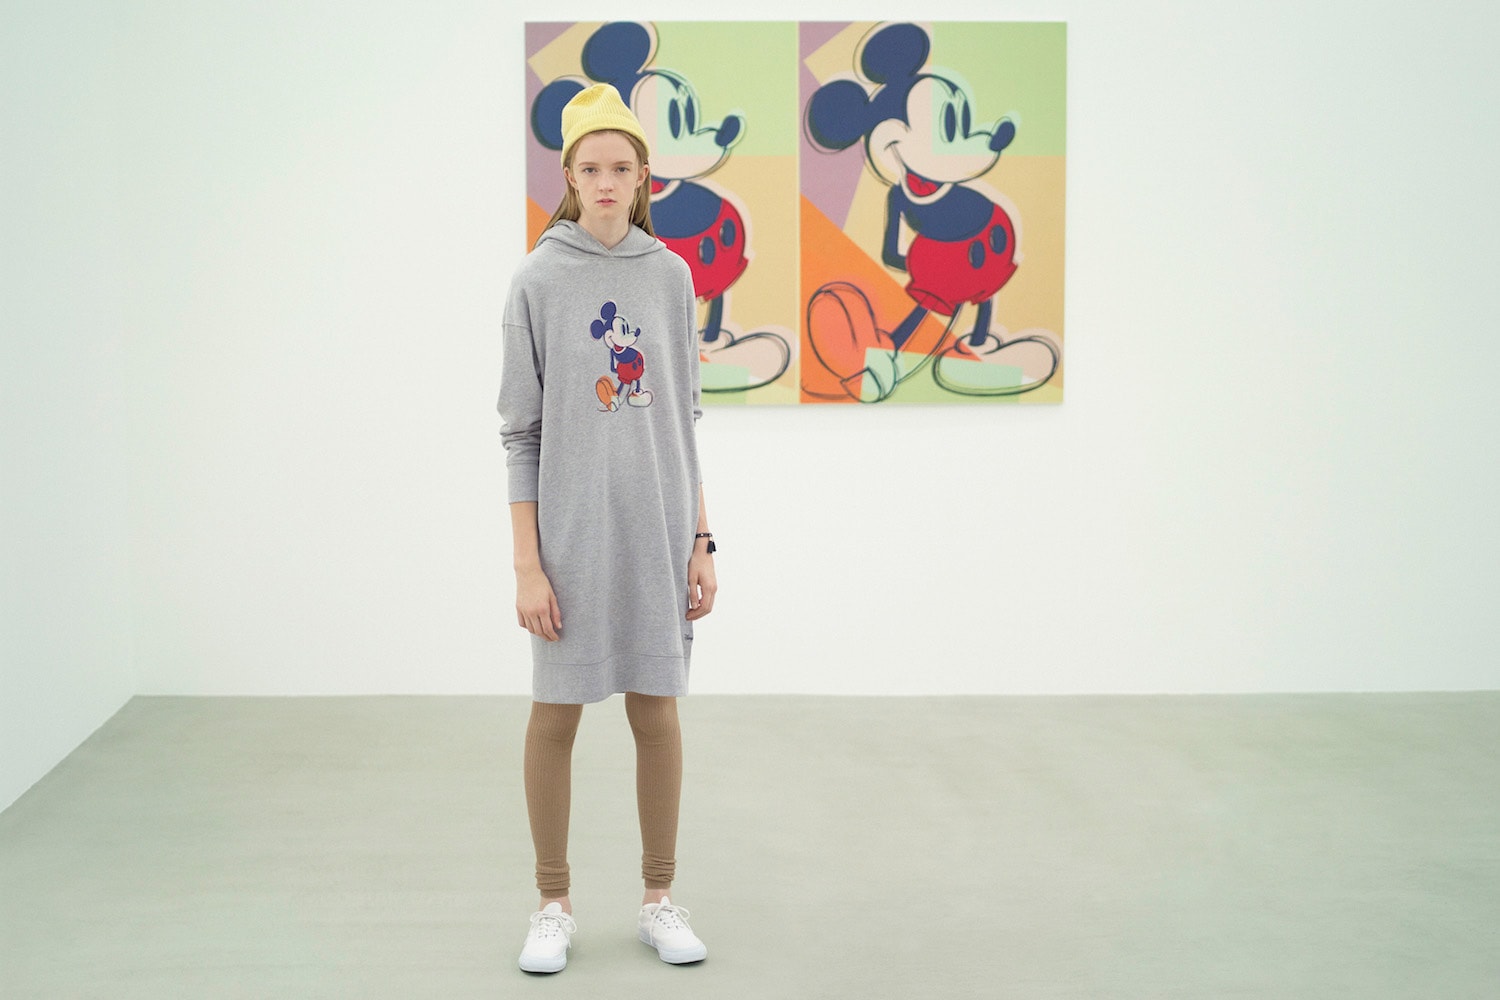 uniqlo ut andy warhol mickey mouse collaboration tee shirt men women kid print artwork 90 birthday anniversary disney painting september 20 2018 release date drop info buy sell